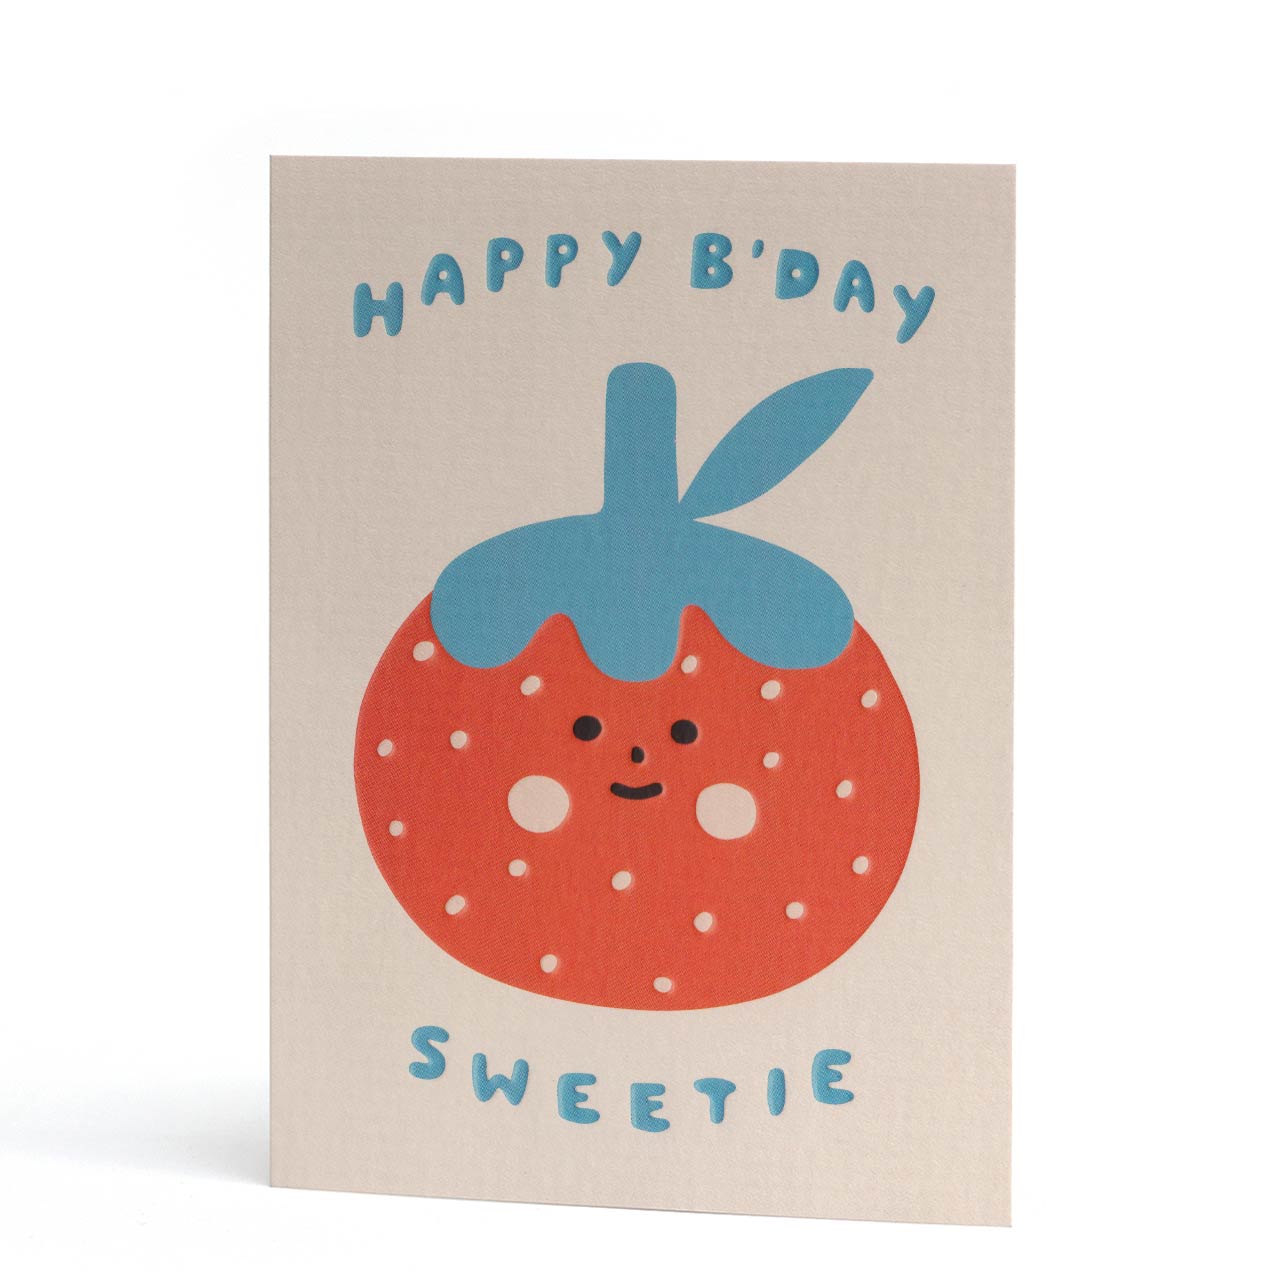 Happy B'Day Sweetie Card